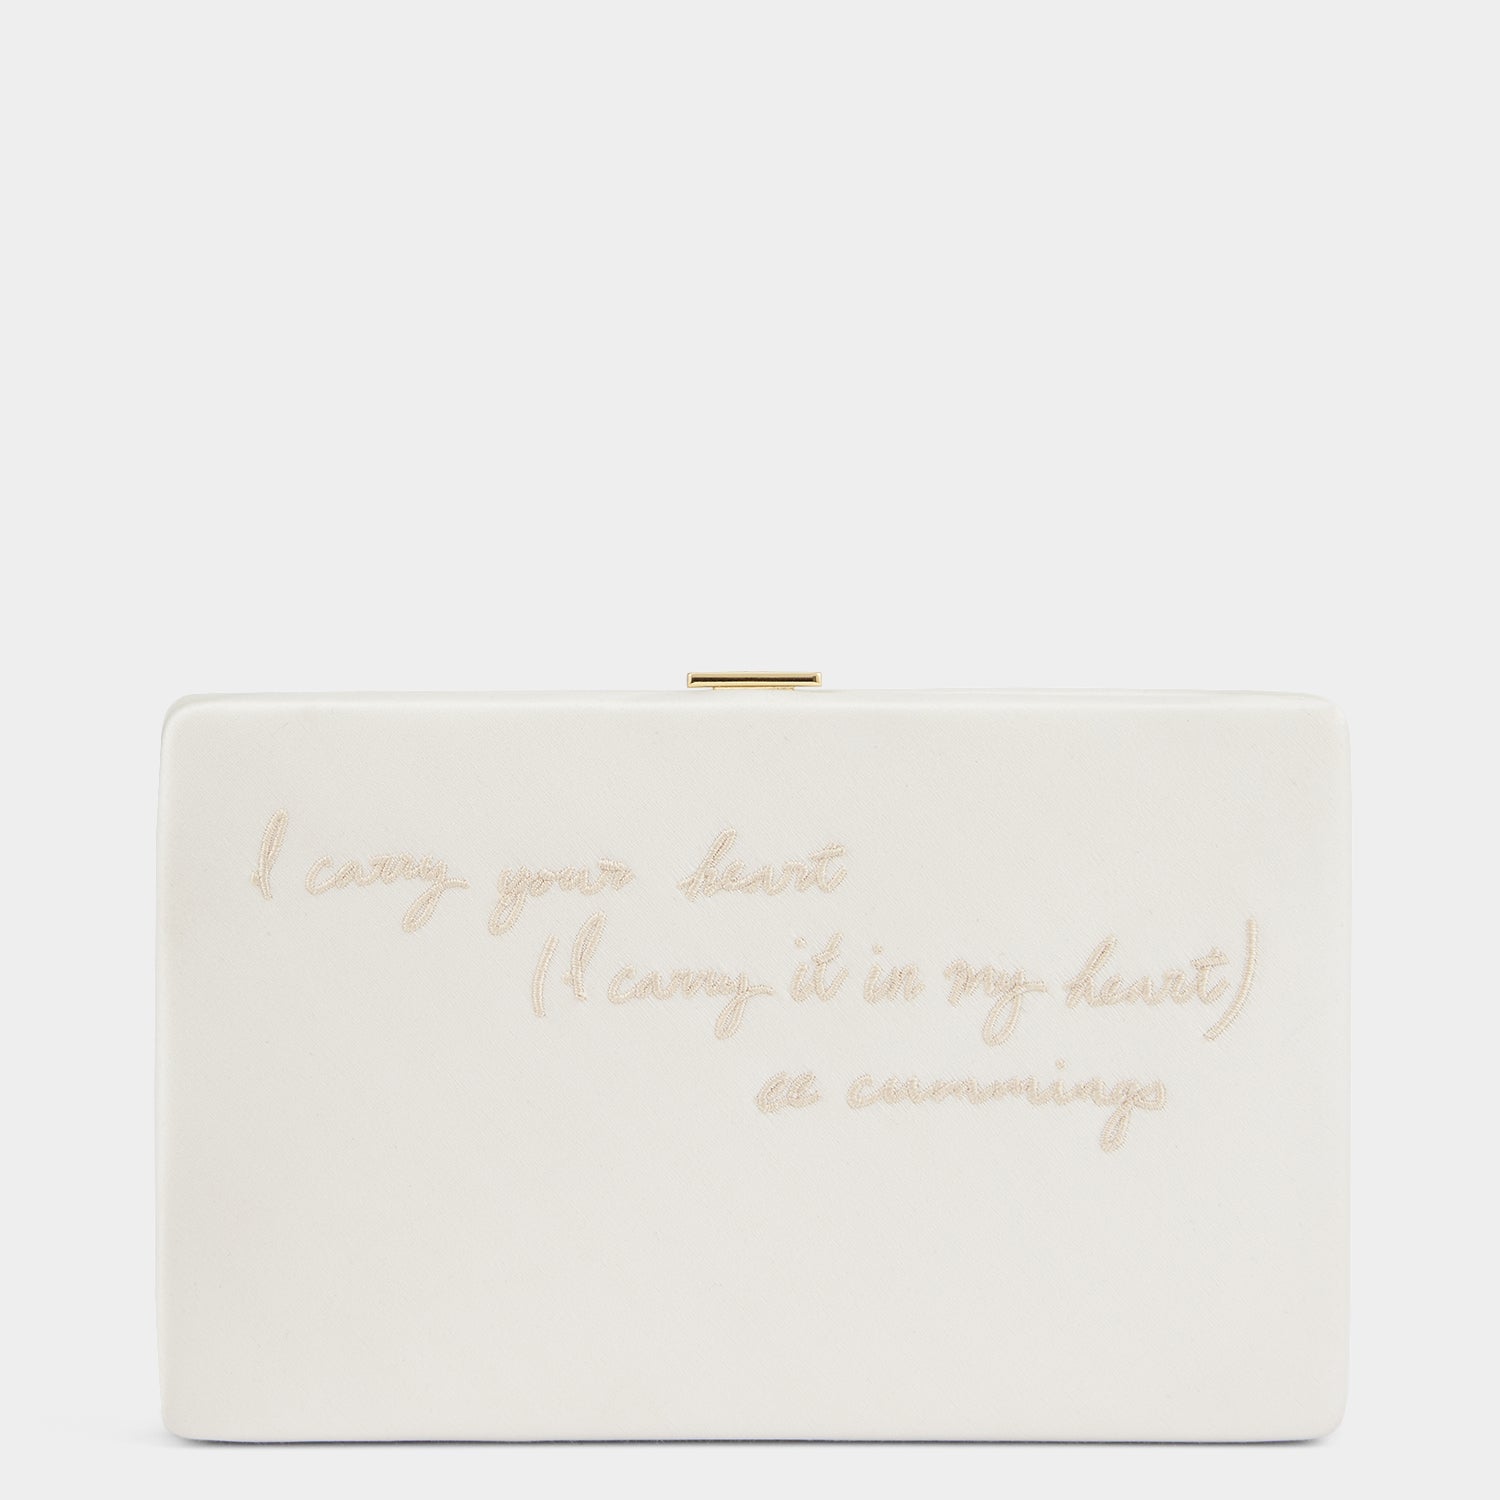 'I carry your heart' Clutch -

                  
                    Recycled Satin in Ivory -
                  

                  Anya Hindmarch UK
